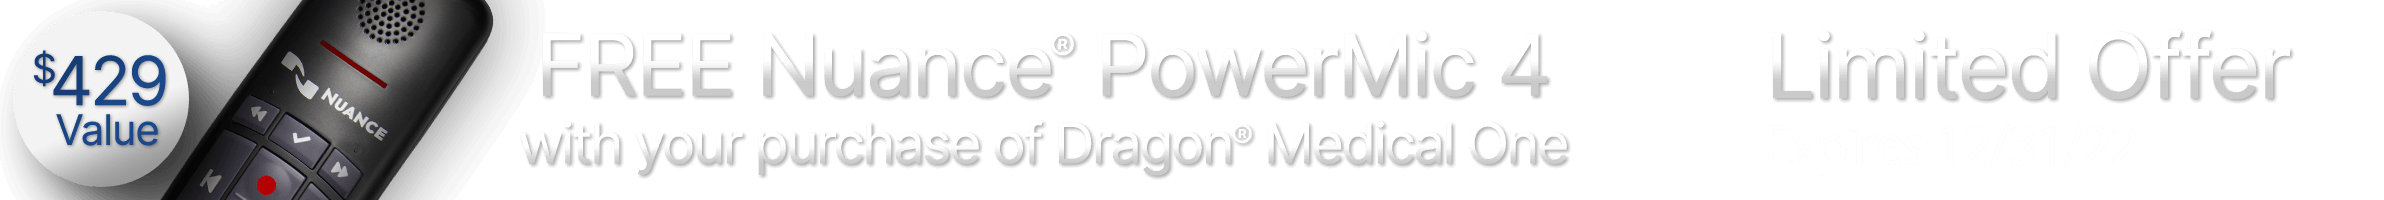 Free Nuance PowerMic 4 with purchase of Dragon Medical One by December 31, 2022